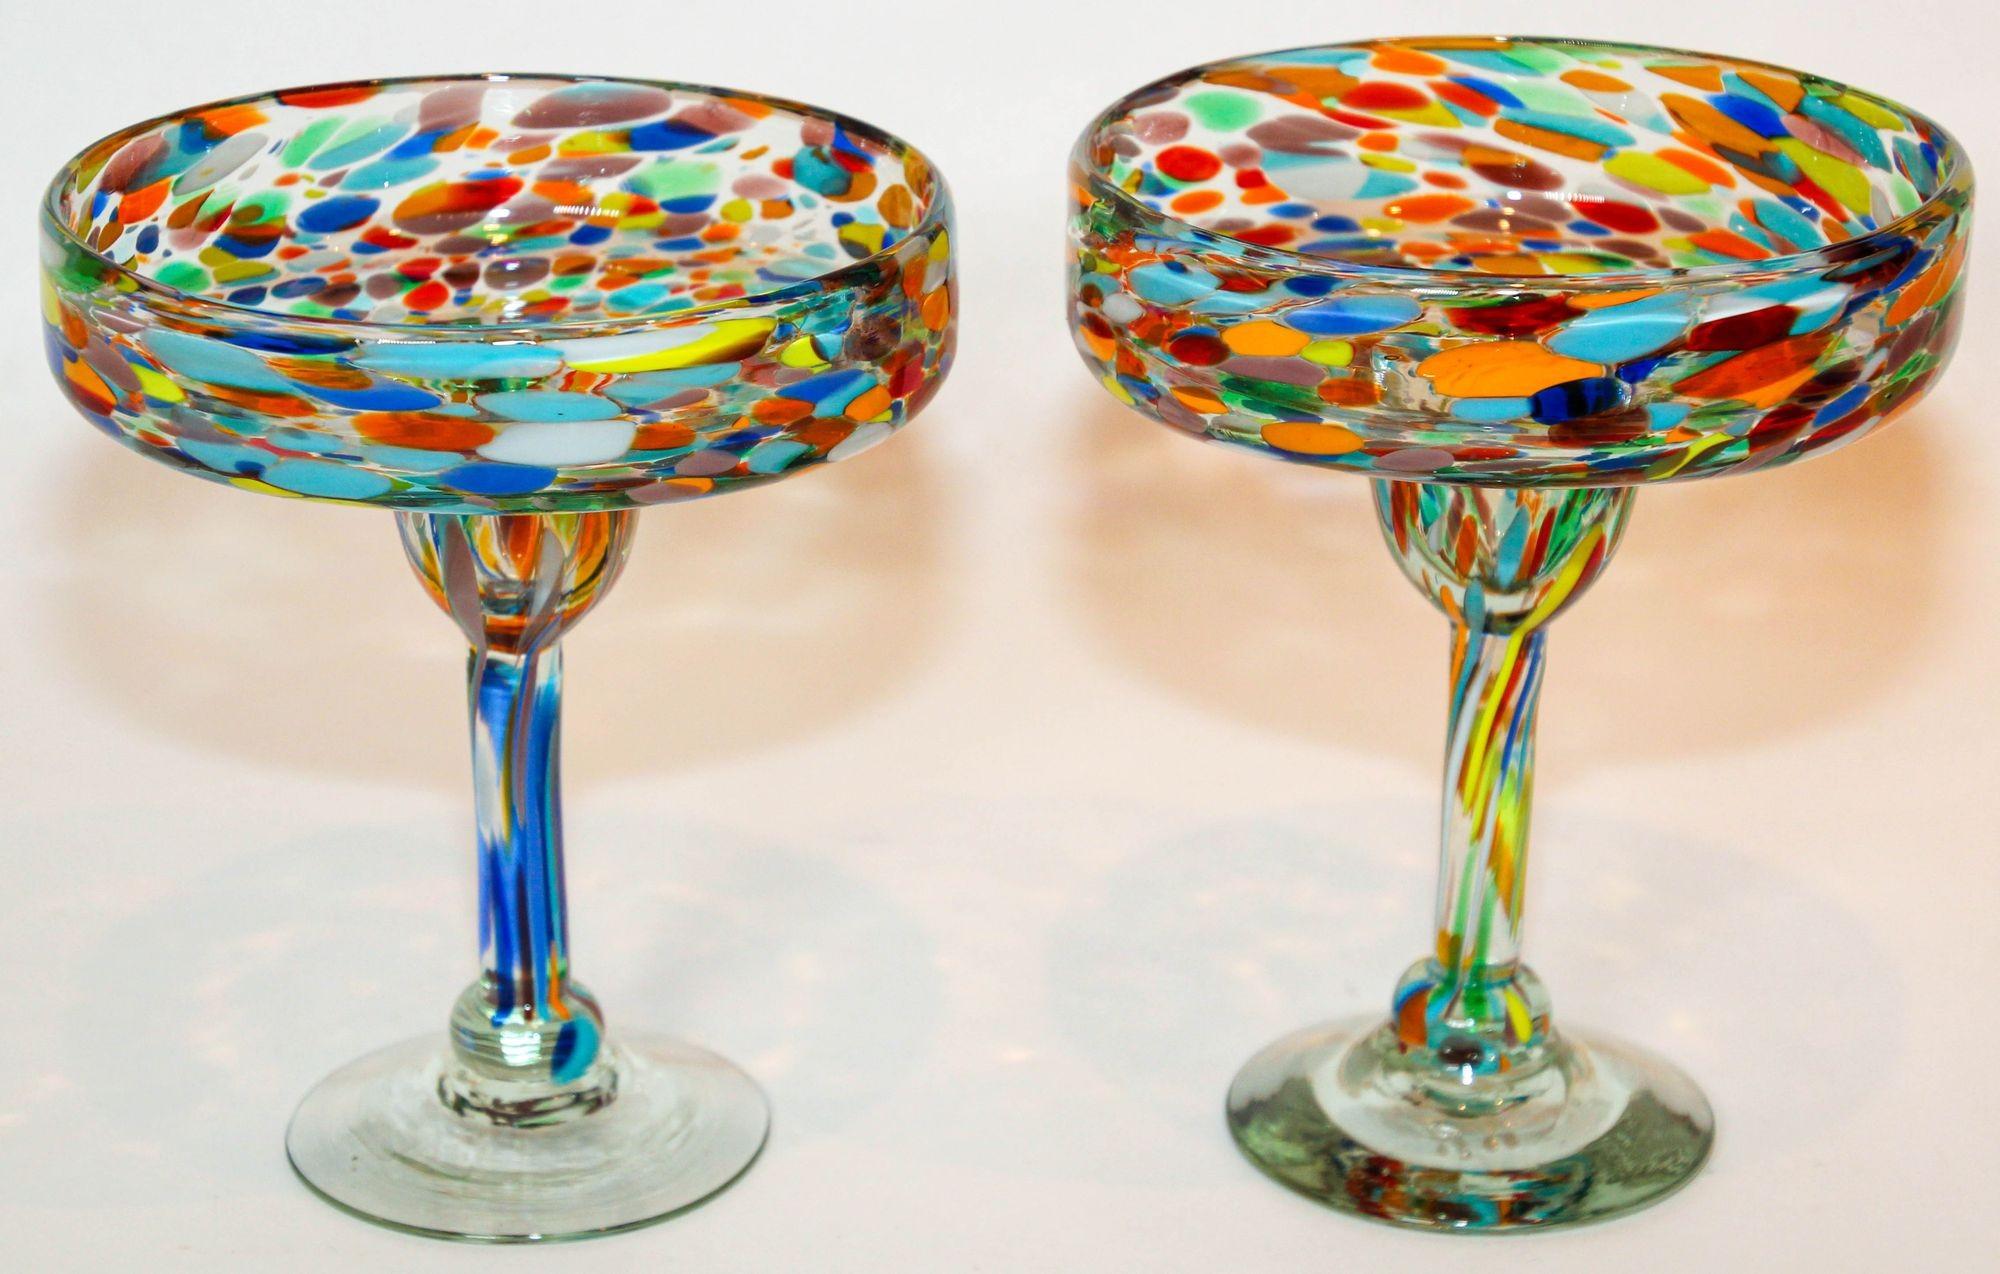 Vintage Murano Martini Glasses,  Set of 2 Colorful Barware Margarita Glasses.
Set of 2 vintage Margarita hand blown glasses featuring colorful accents in bright confetti colors.
Handcrafted using glass-blowing techniques, individually handmade,